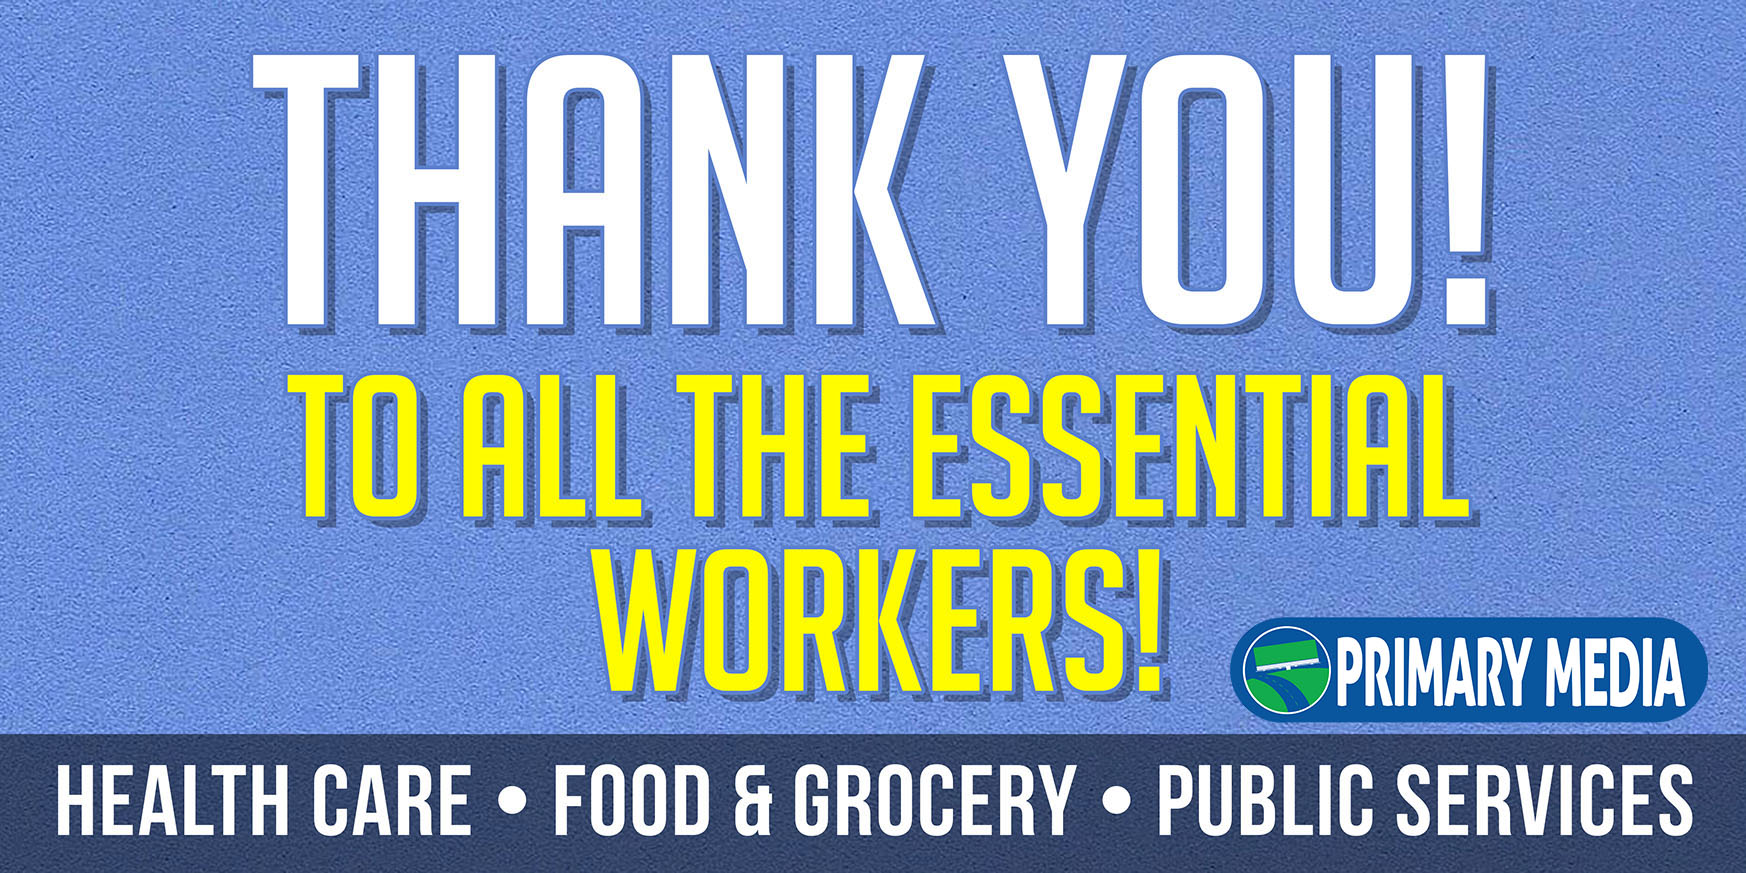 Thank you essential workers